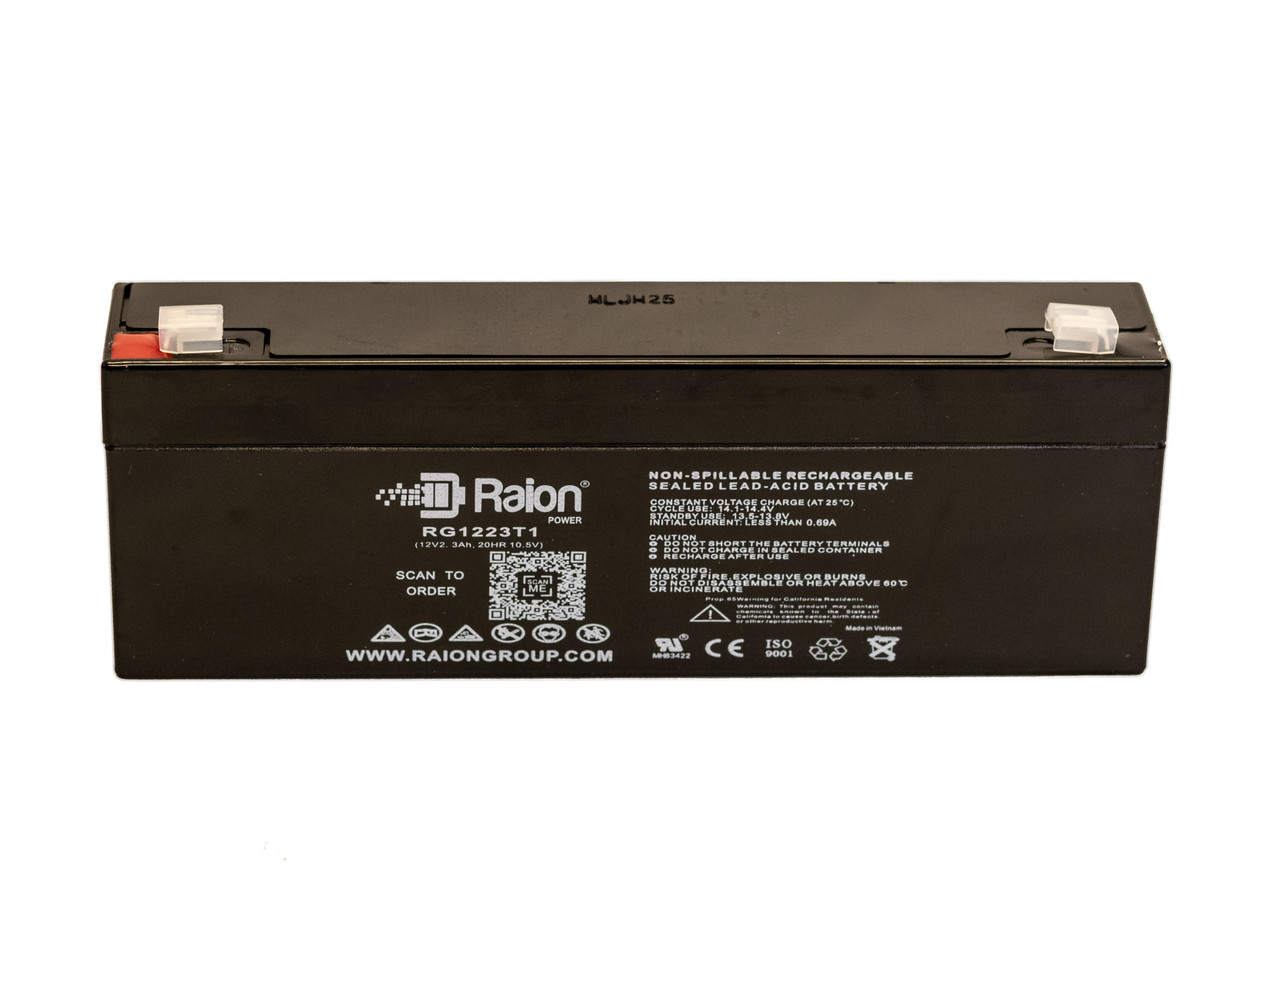 Raion Power 12V 2.3Ah SLA Battery With T1 Terminals For Datascope Accutorr 3 Monitor